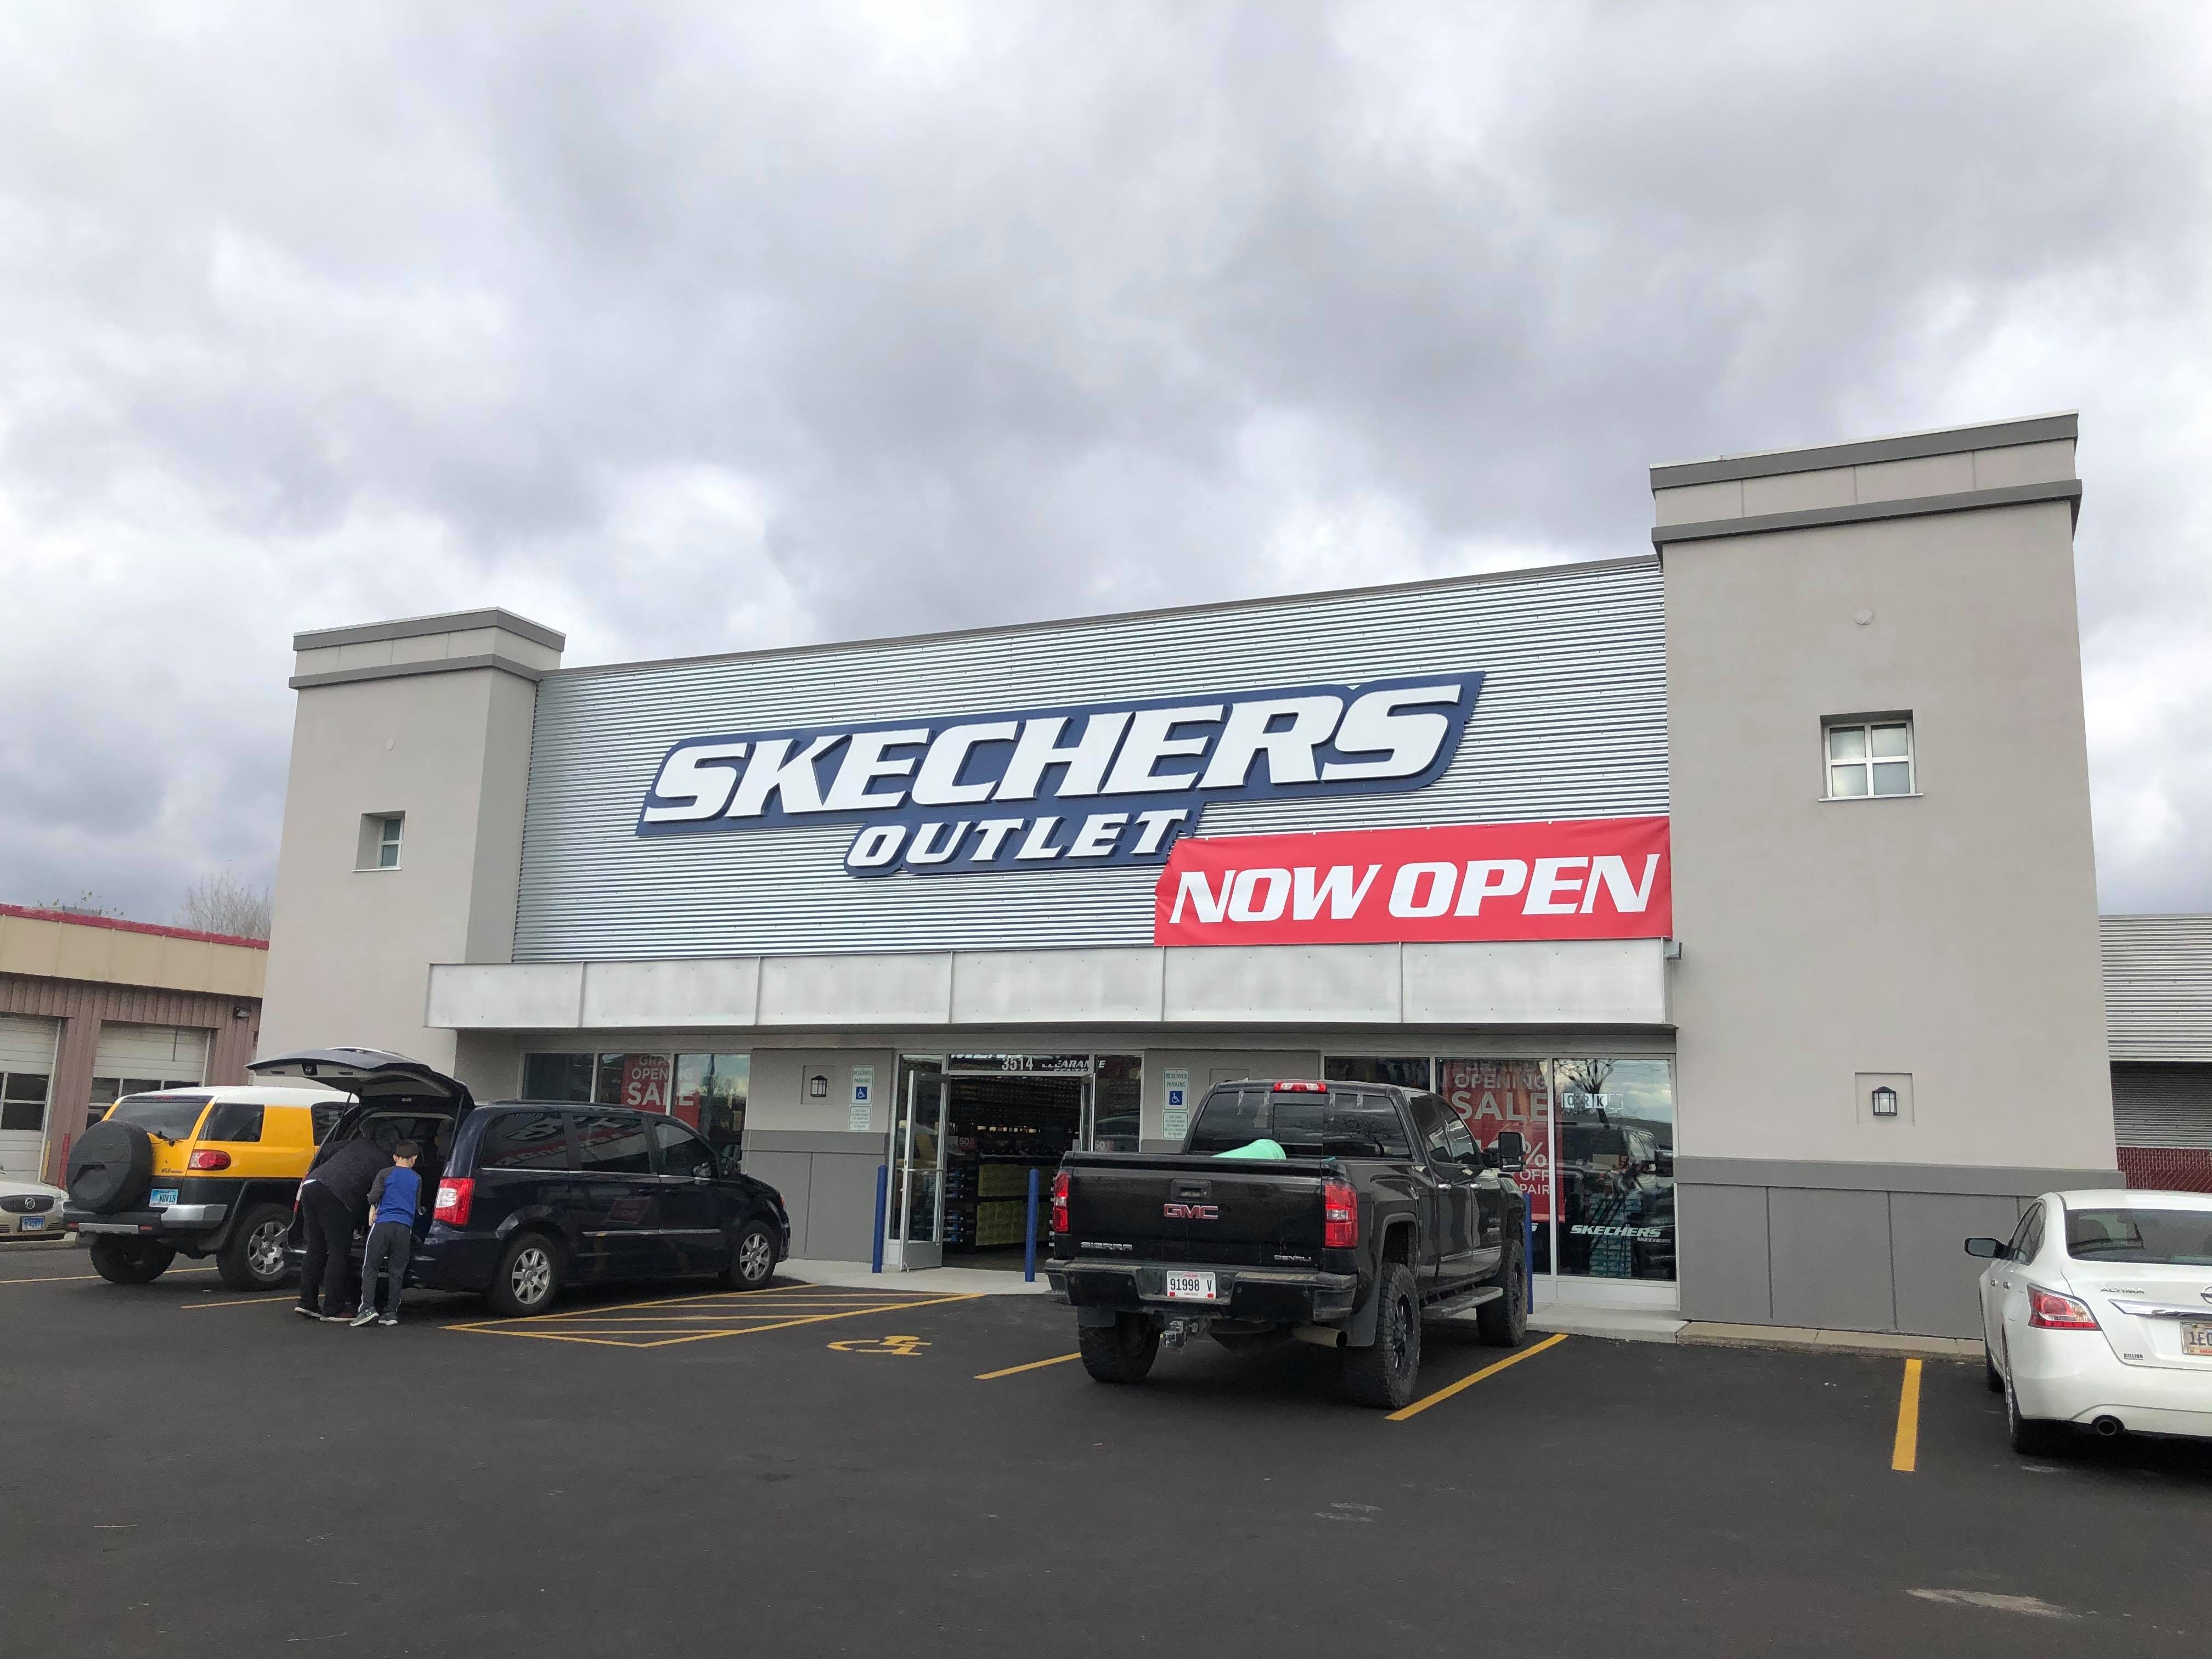 Skechers outlet store opens on 41st Street